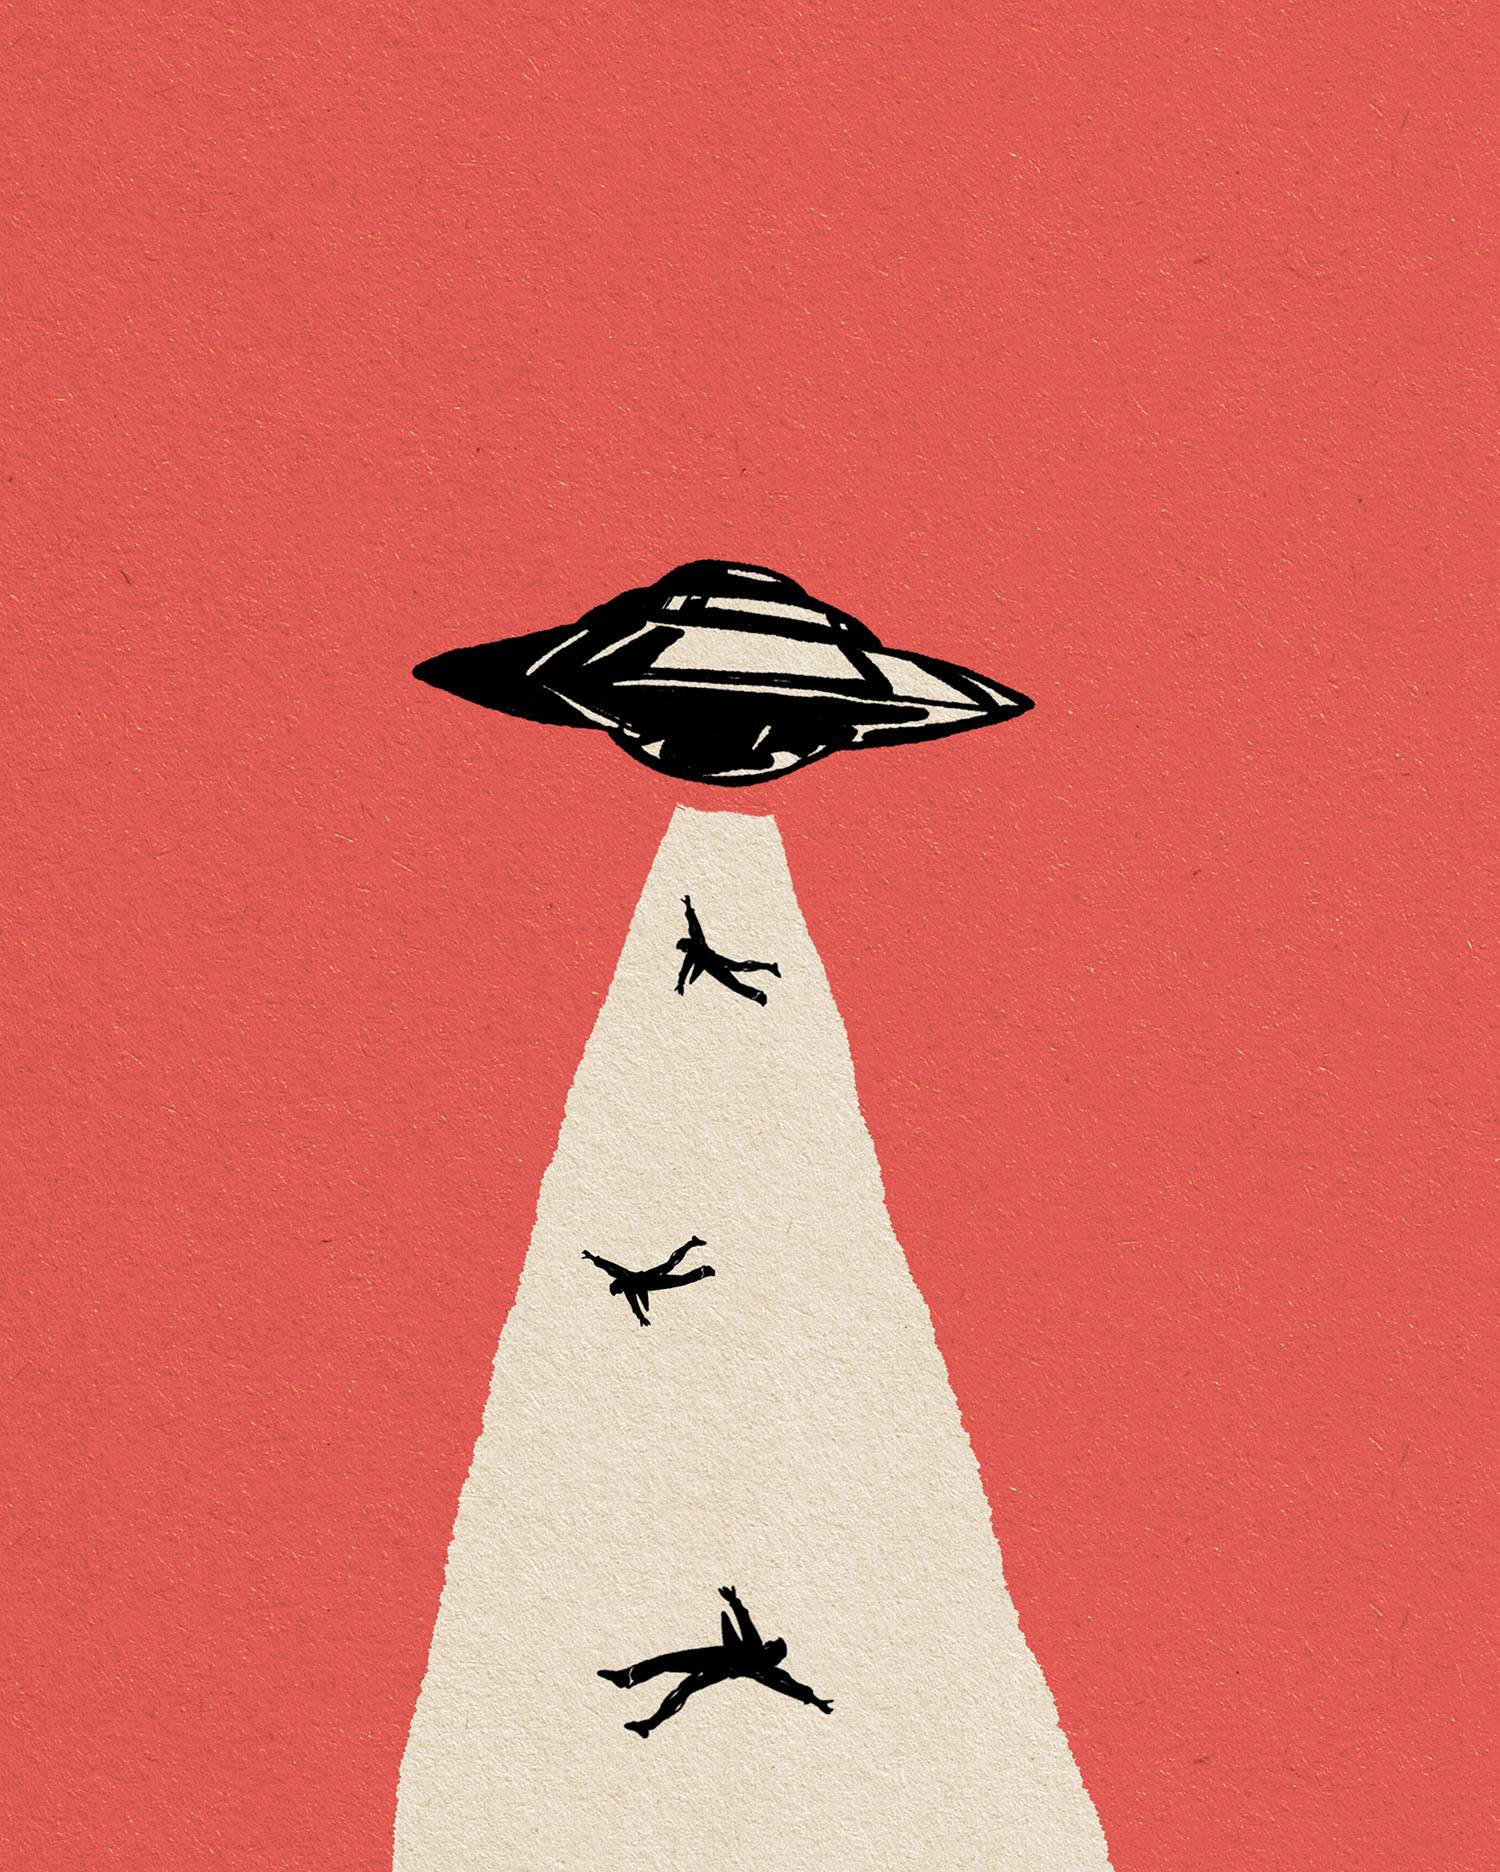 Alien Spacecraft Abducting People Vintage style illustration of a ufo abducting humans from the ground.